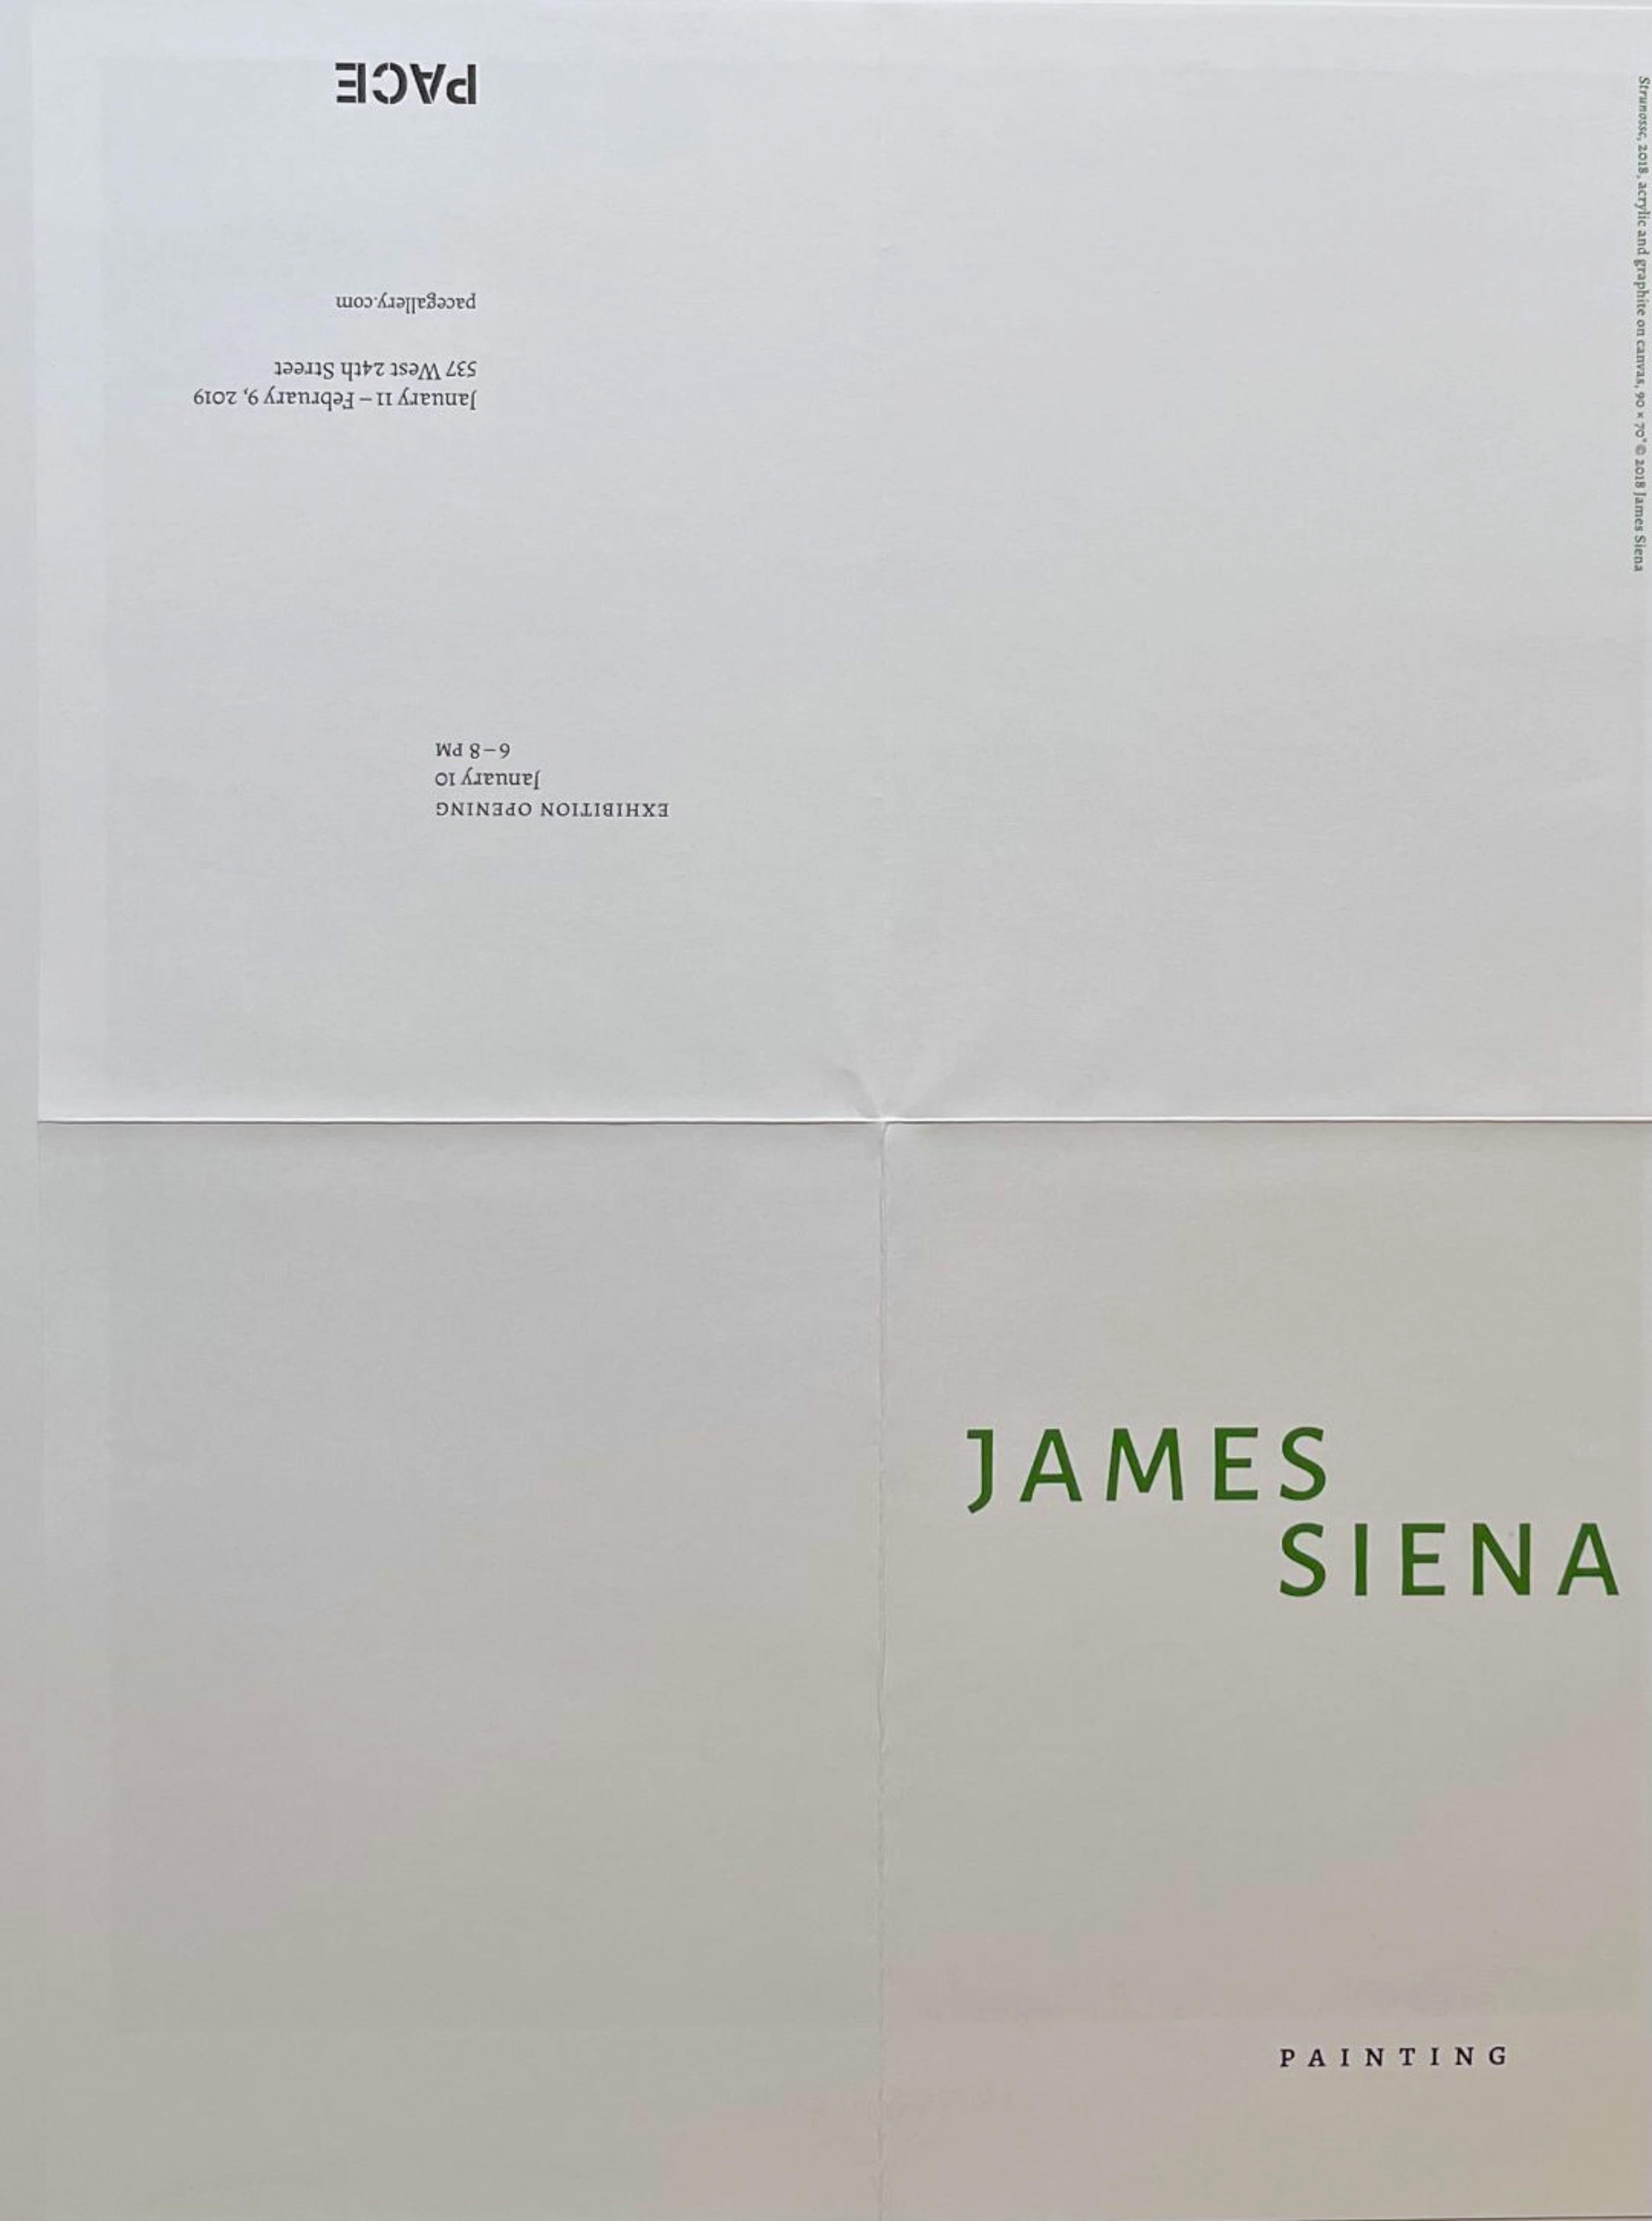 James Siena at PACE Gallery, 2019
Offset lithograph exhibition invitation (Hand signed by James Siena)
19 1/2 × 14 1/2 inches
Unframed
This exquisite fold out poster invitation, published by PACE Gallery on the occasion of the James Siena's 2019